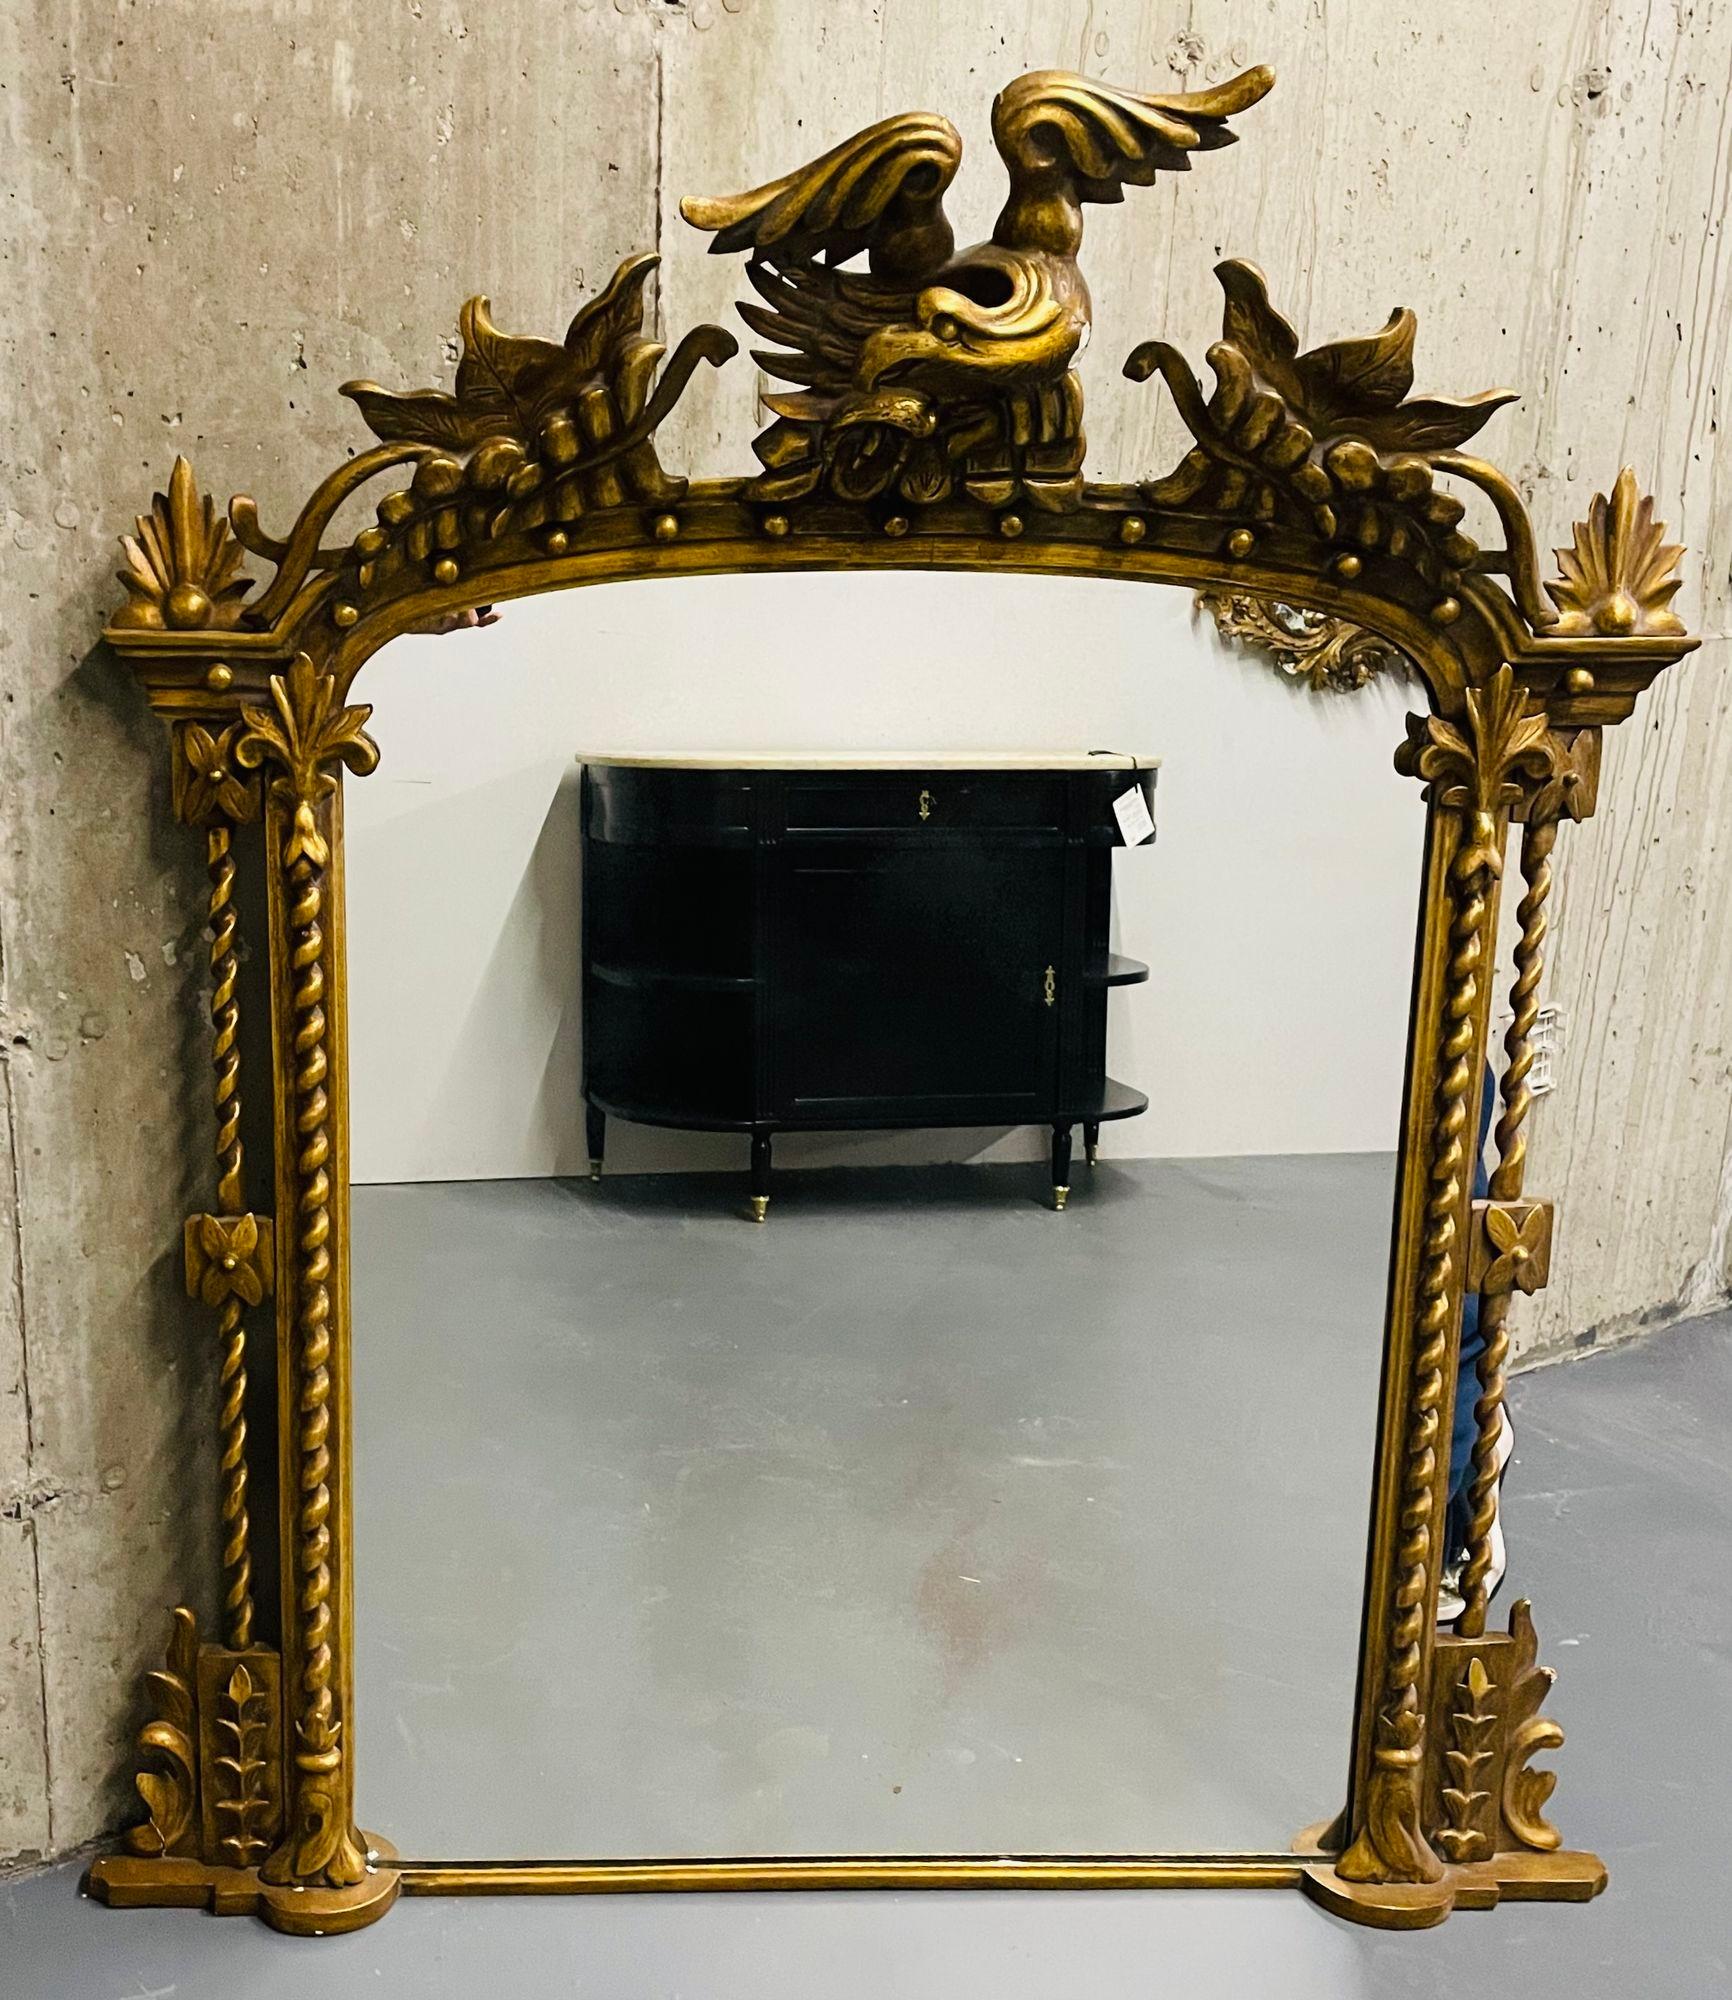 Antique Federal Style Carved Giltwood Wall / console / Pier mirror, 1900s

A finely carved versatile mirror that can be used on the floor or over the mantle, console or hanging on the wall. This quality large and impressive clear clean center